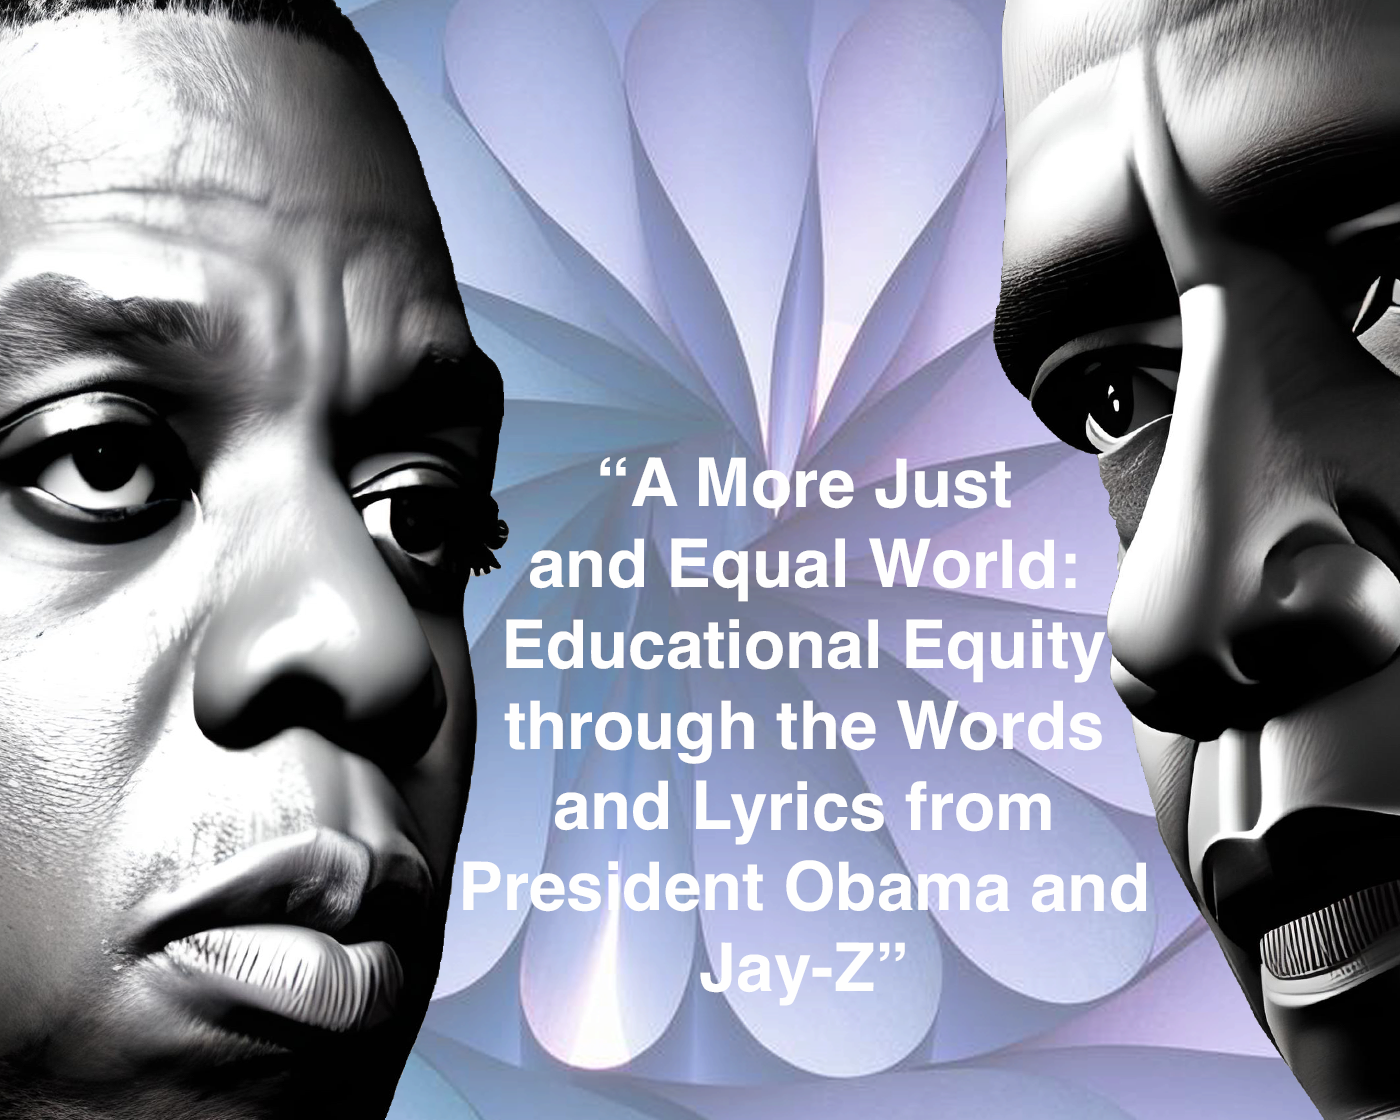 “A More Just and Equal World: Educational Equity through the Words and Lyrics from President Obama and Jay-Z.”